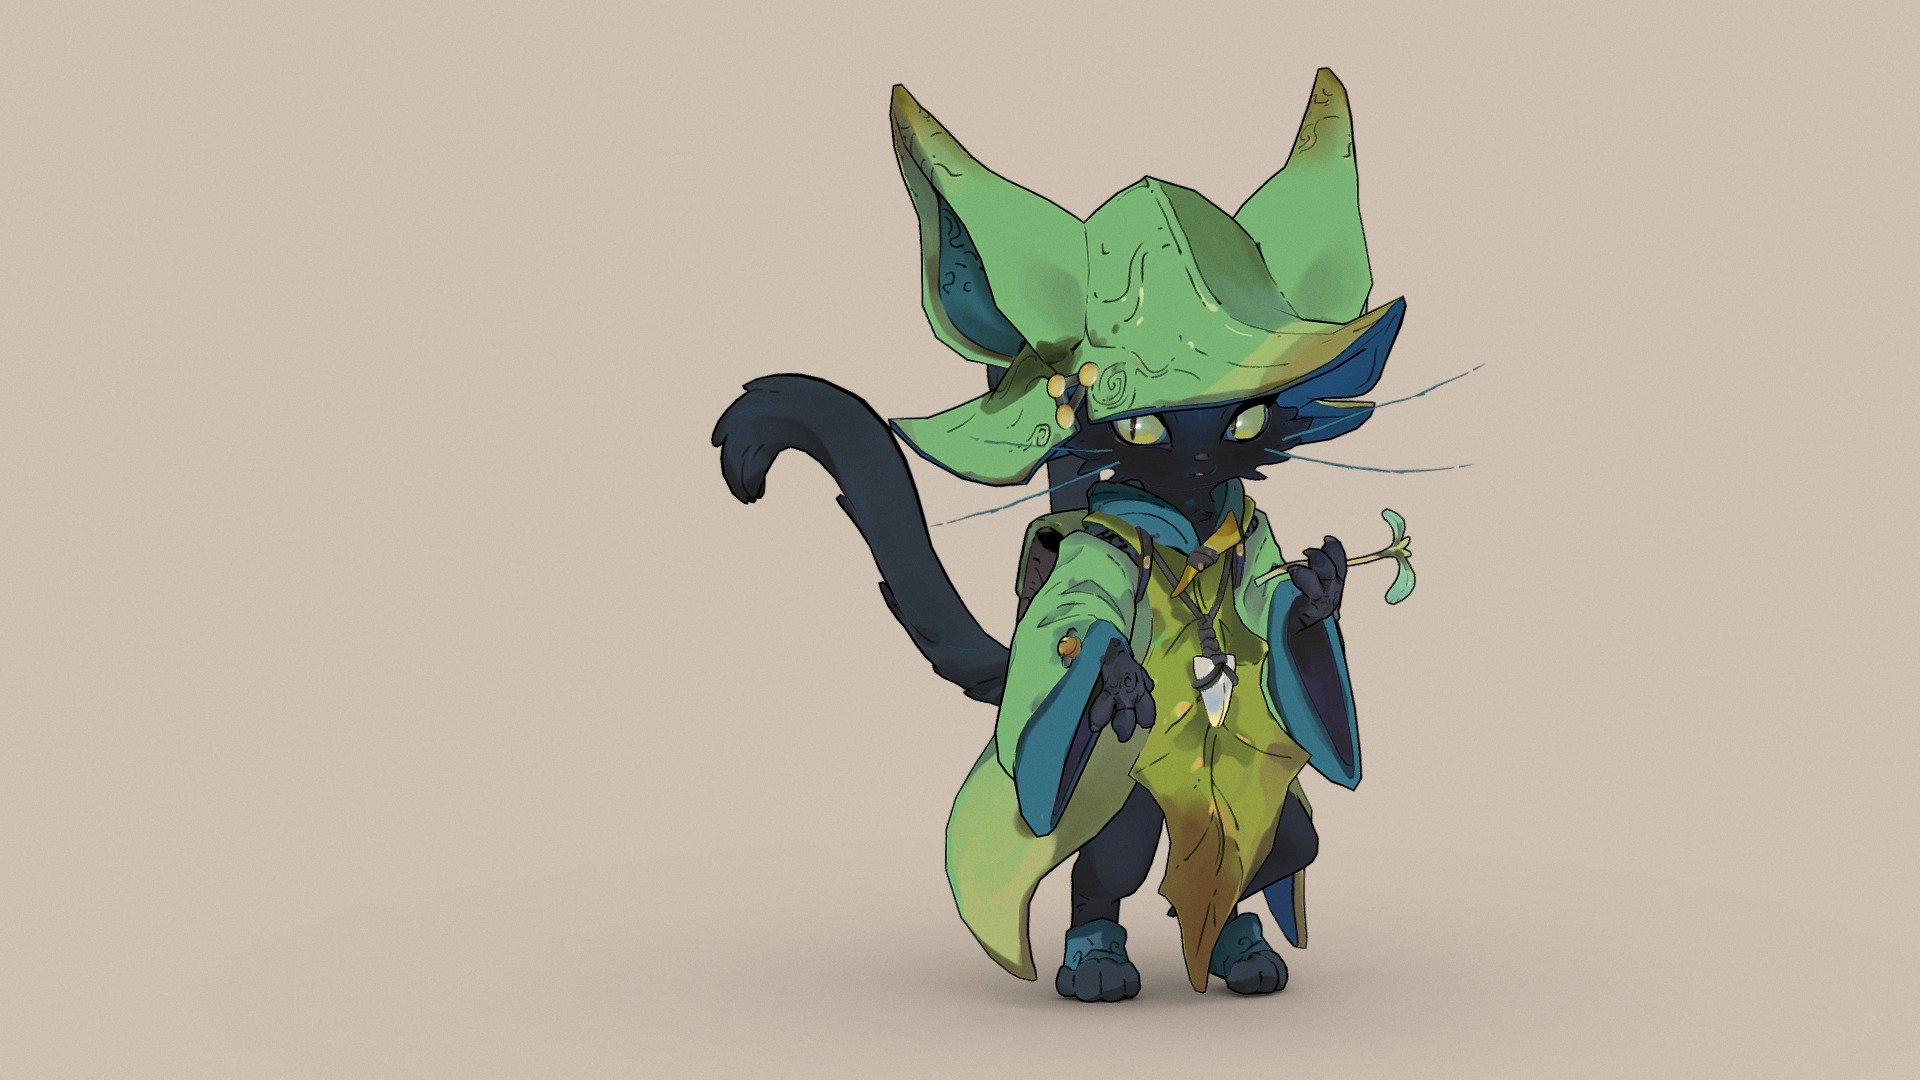 Concept art by Ovopack 

Sculpted in ZBrush.
Retopologised/rigged/skinned in Maya.
Hand painted in Blender.

Want to see how I made this character? Check it out here:
https://www.notion.so/Travelling-Cat-1bed78841e6e40db96058d4f9874c899 - Travelling Cat - 3D model by Emily Harrison (@emilyharrison) 3d model